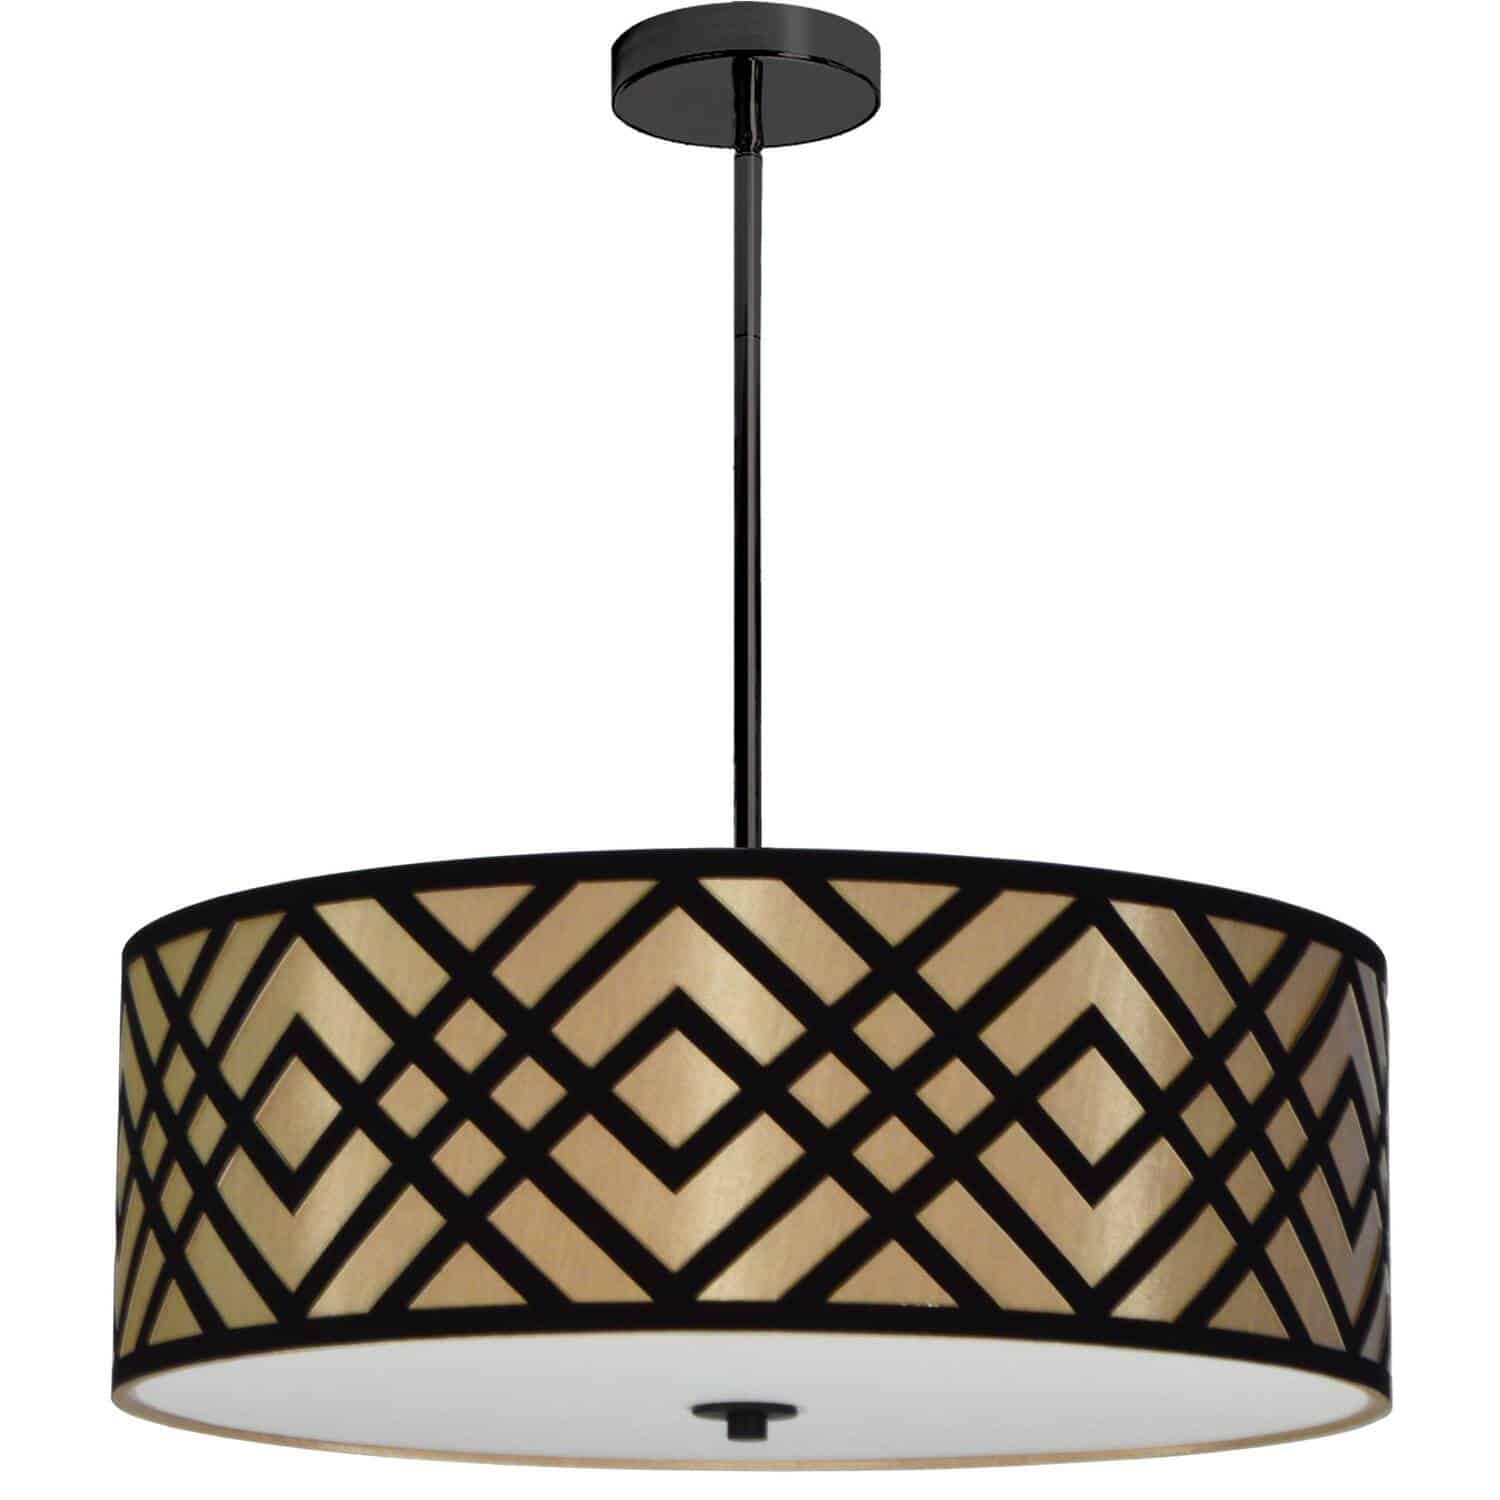 The classic drum style light fixture gets a pop of conspicuous couture style in the Mona family of lighting. Mona lighting is characterized by an eye-catching pattern with a slim profile, creating a look that can blend with a range of décor styles. A discrete metal frame holds the stylish two-color fabric shade. With warm or cool colorways available, a lighter base color is overlaid with a mesmerizing geometric patterns of criss-crossing lines. Available in flush mount or pendant configurations, it creates a fashionable focal point in living and dining rooms, foyers or main hallways.